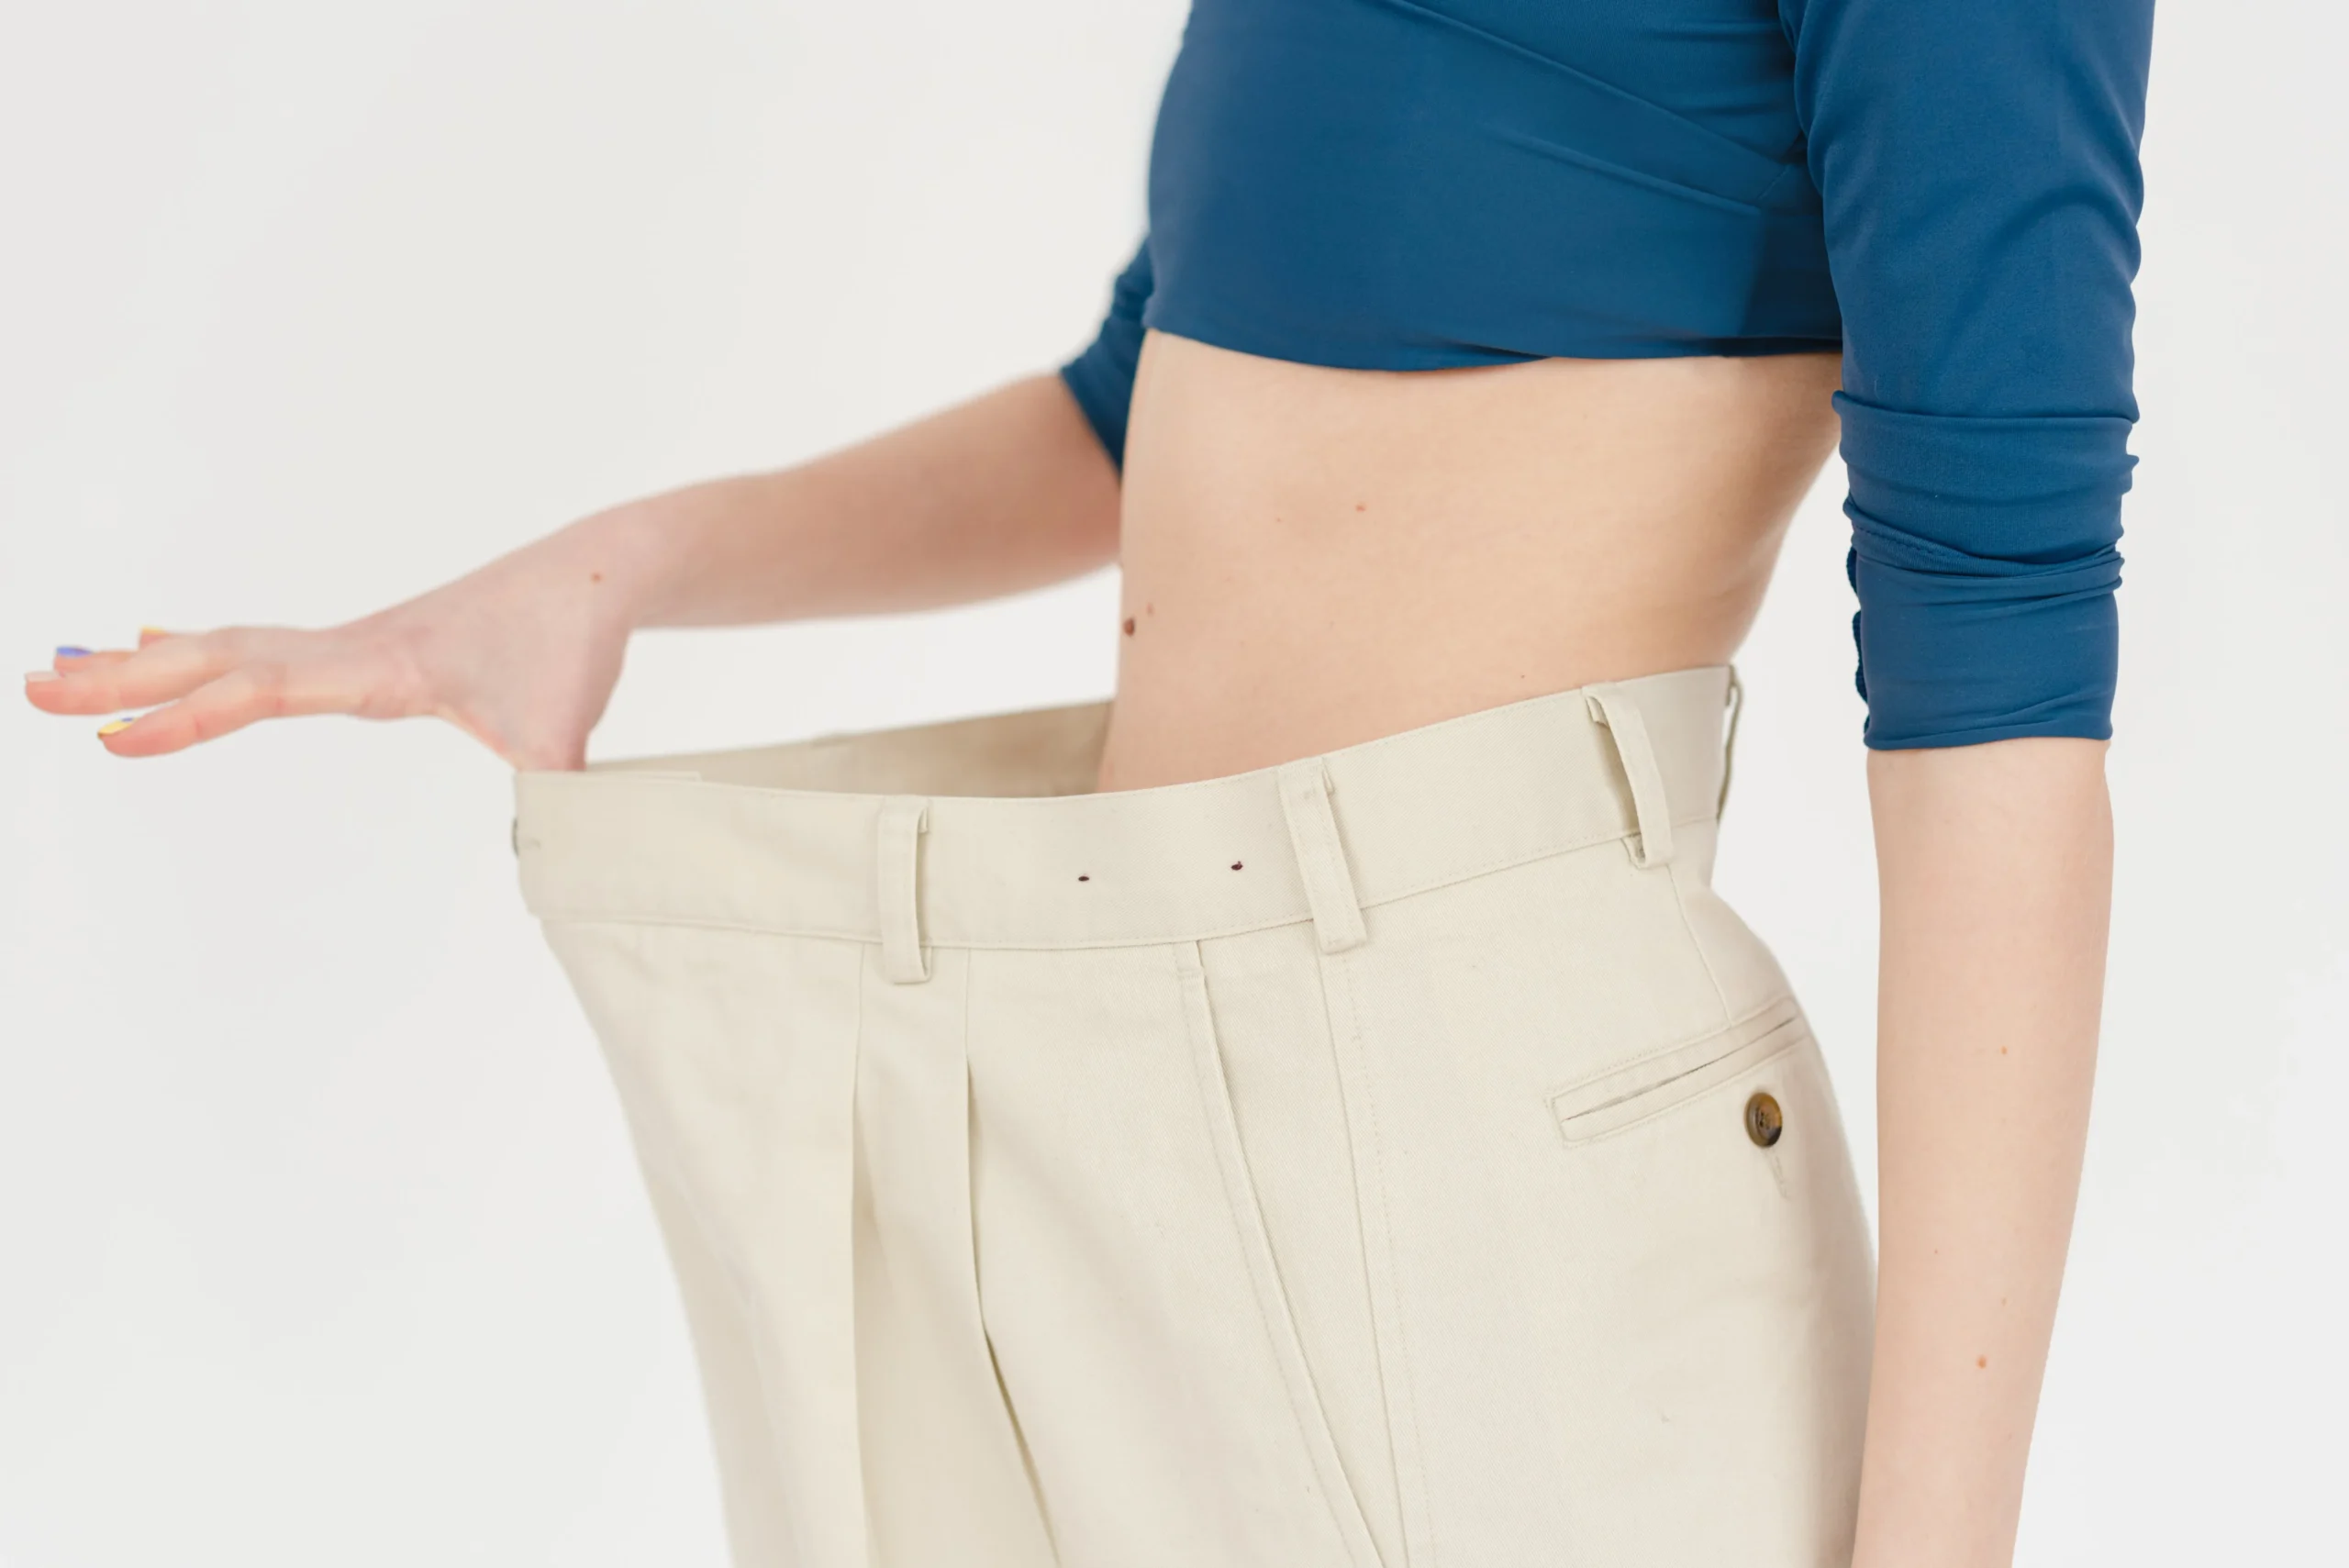 Frequently Asked Questions on Semaglutide - Woman holding out pants that are too big on her